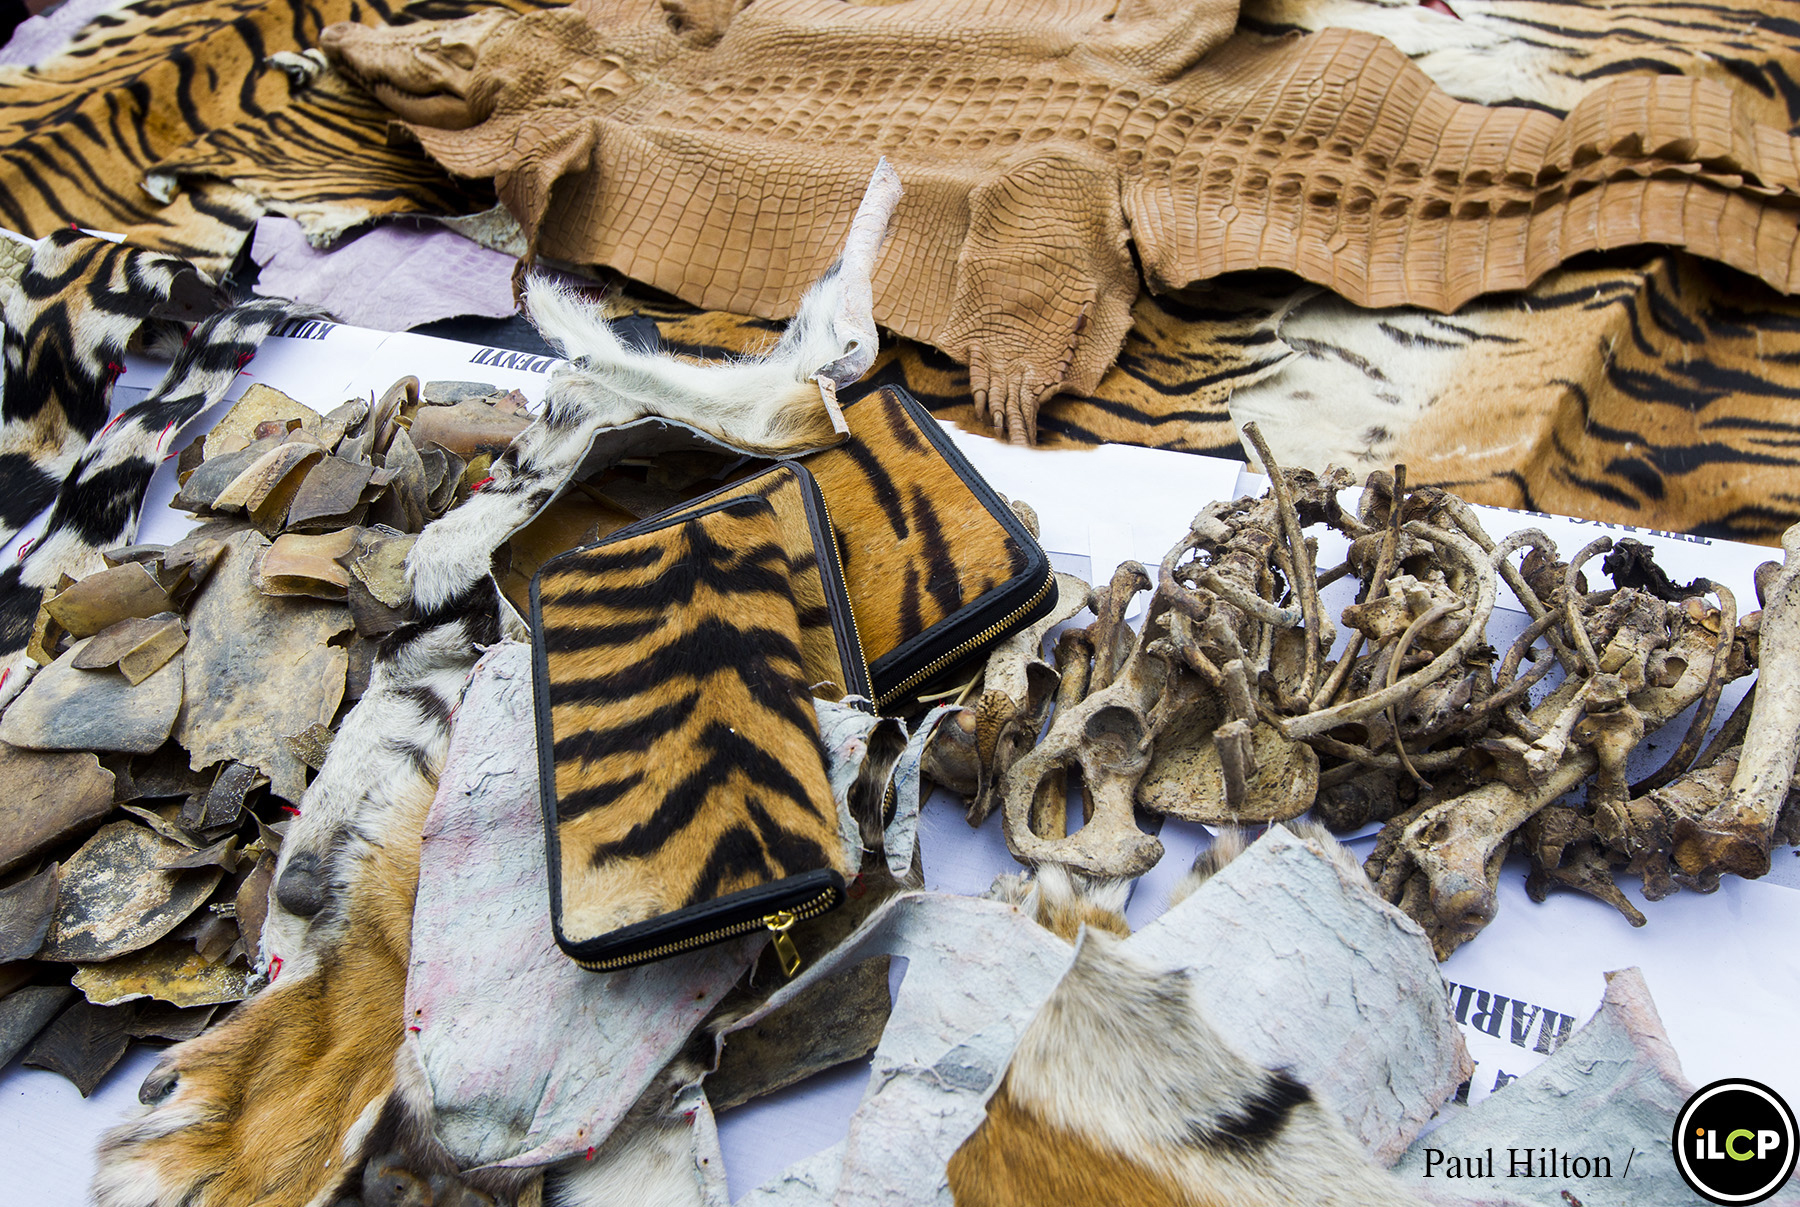 Products made of the Malayan Tiger's skin, teeth and claws.